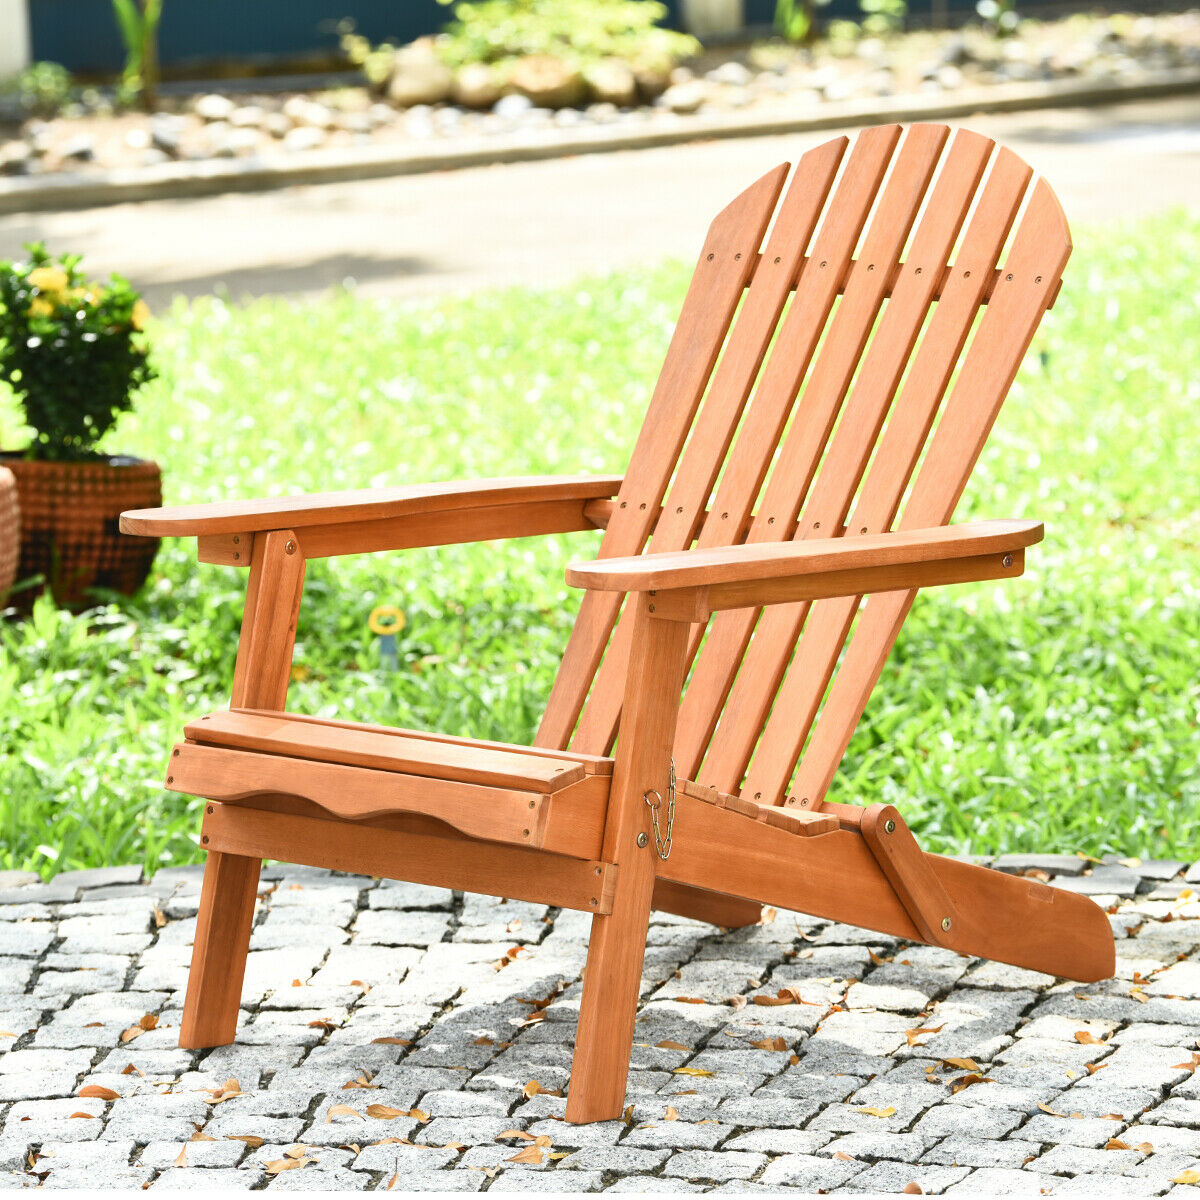 Eucalyptus Adirondack Chair Foldable Outdoor Wood Lounger Chair Natural